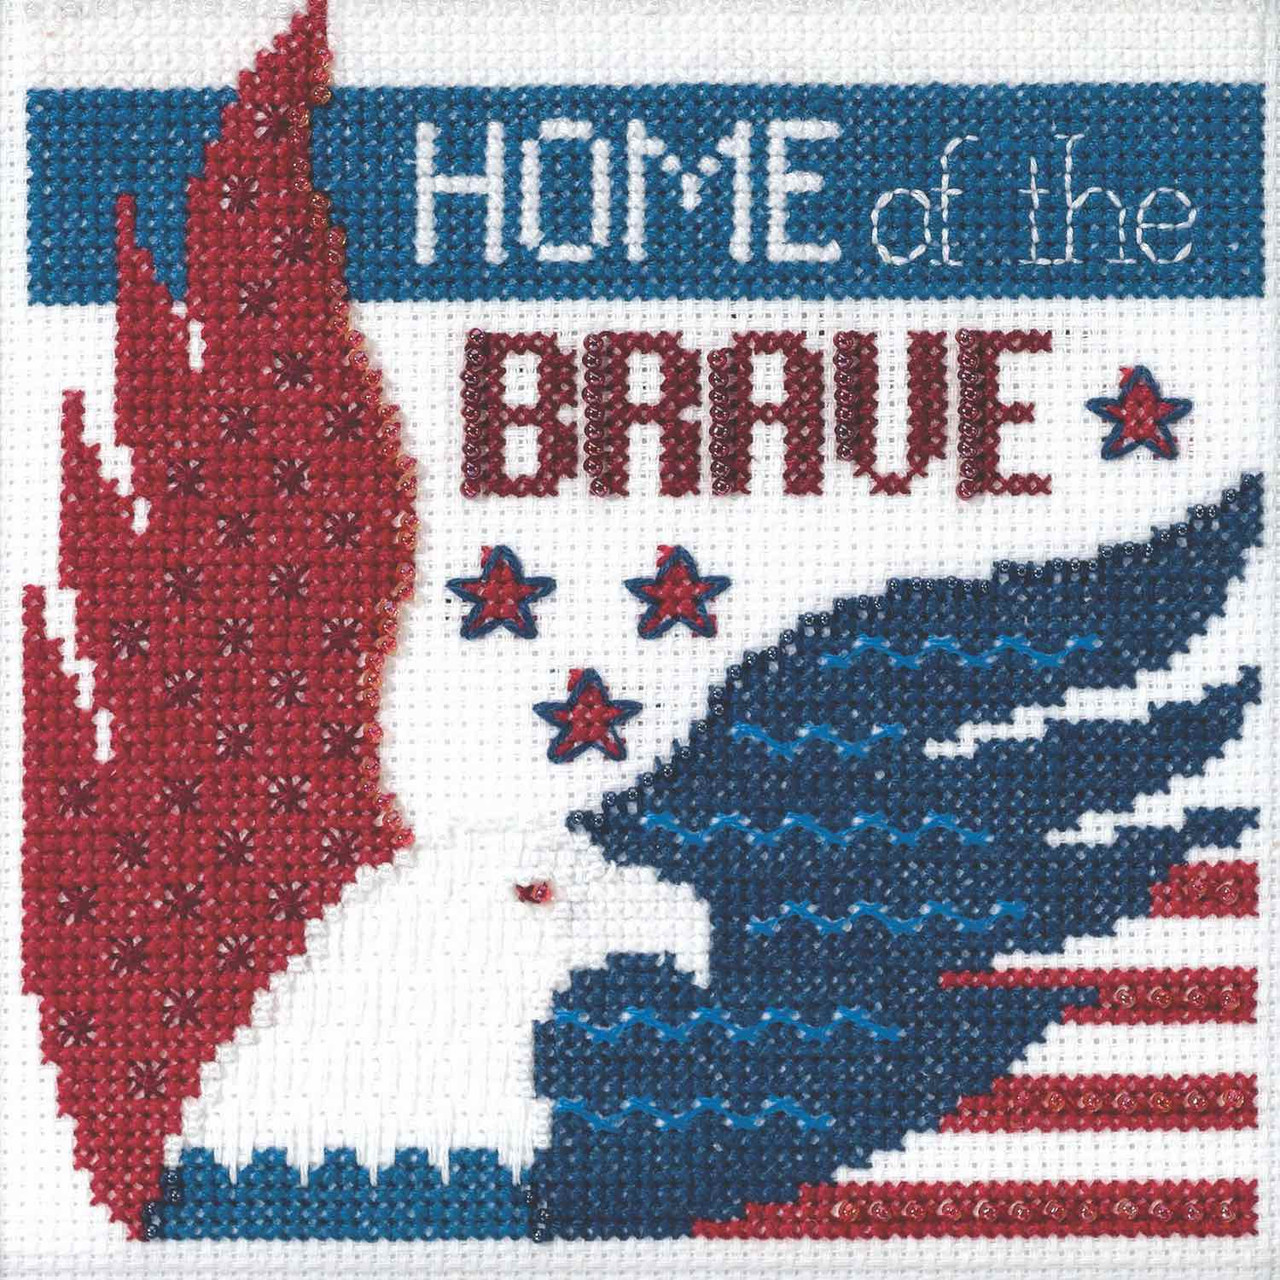 Stitched area of Home of the Brave Beaded Cross Stitch Kit Mill Hill 2019 Patriotic Quartet MH171913